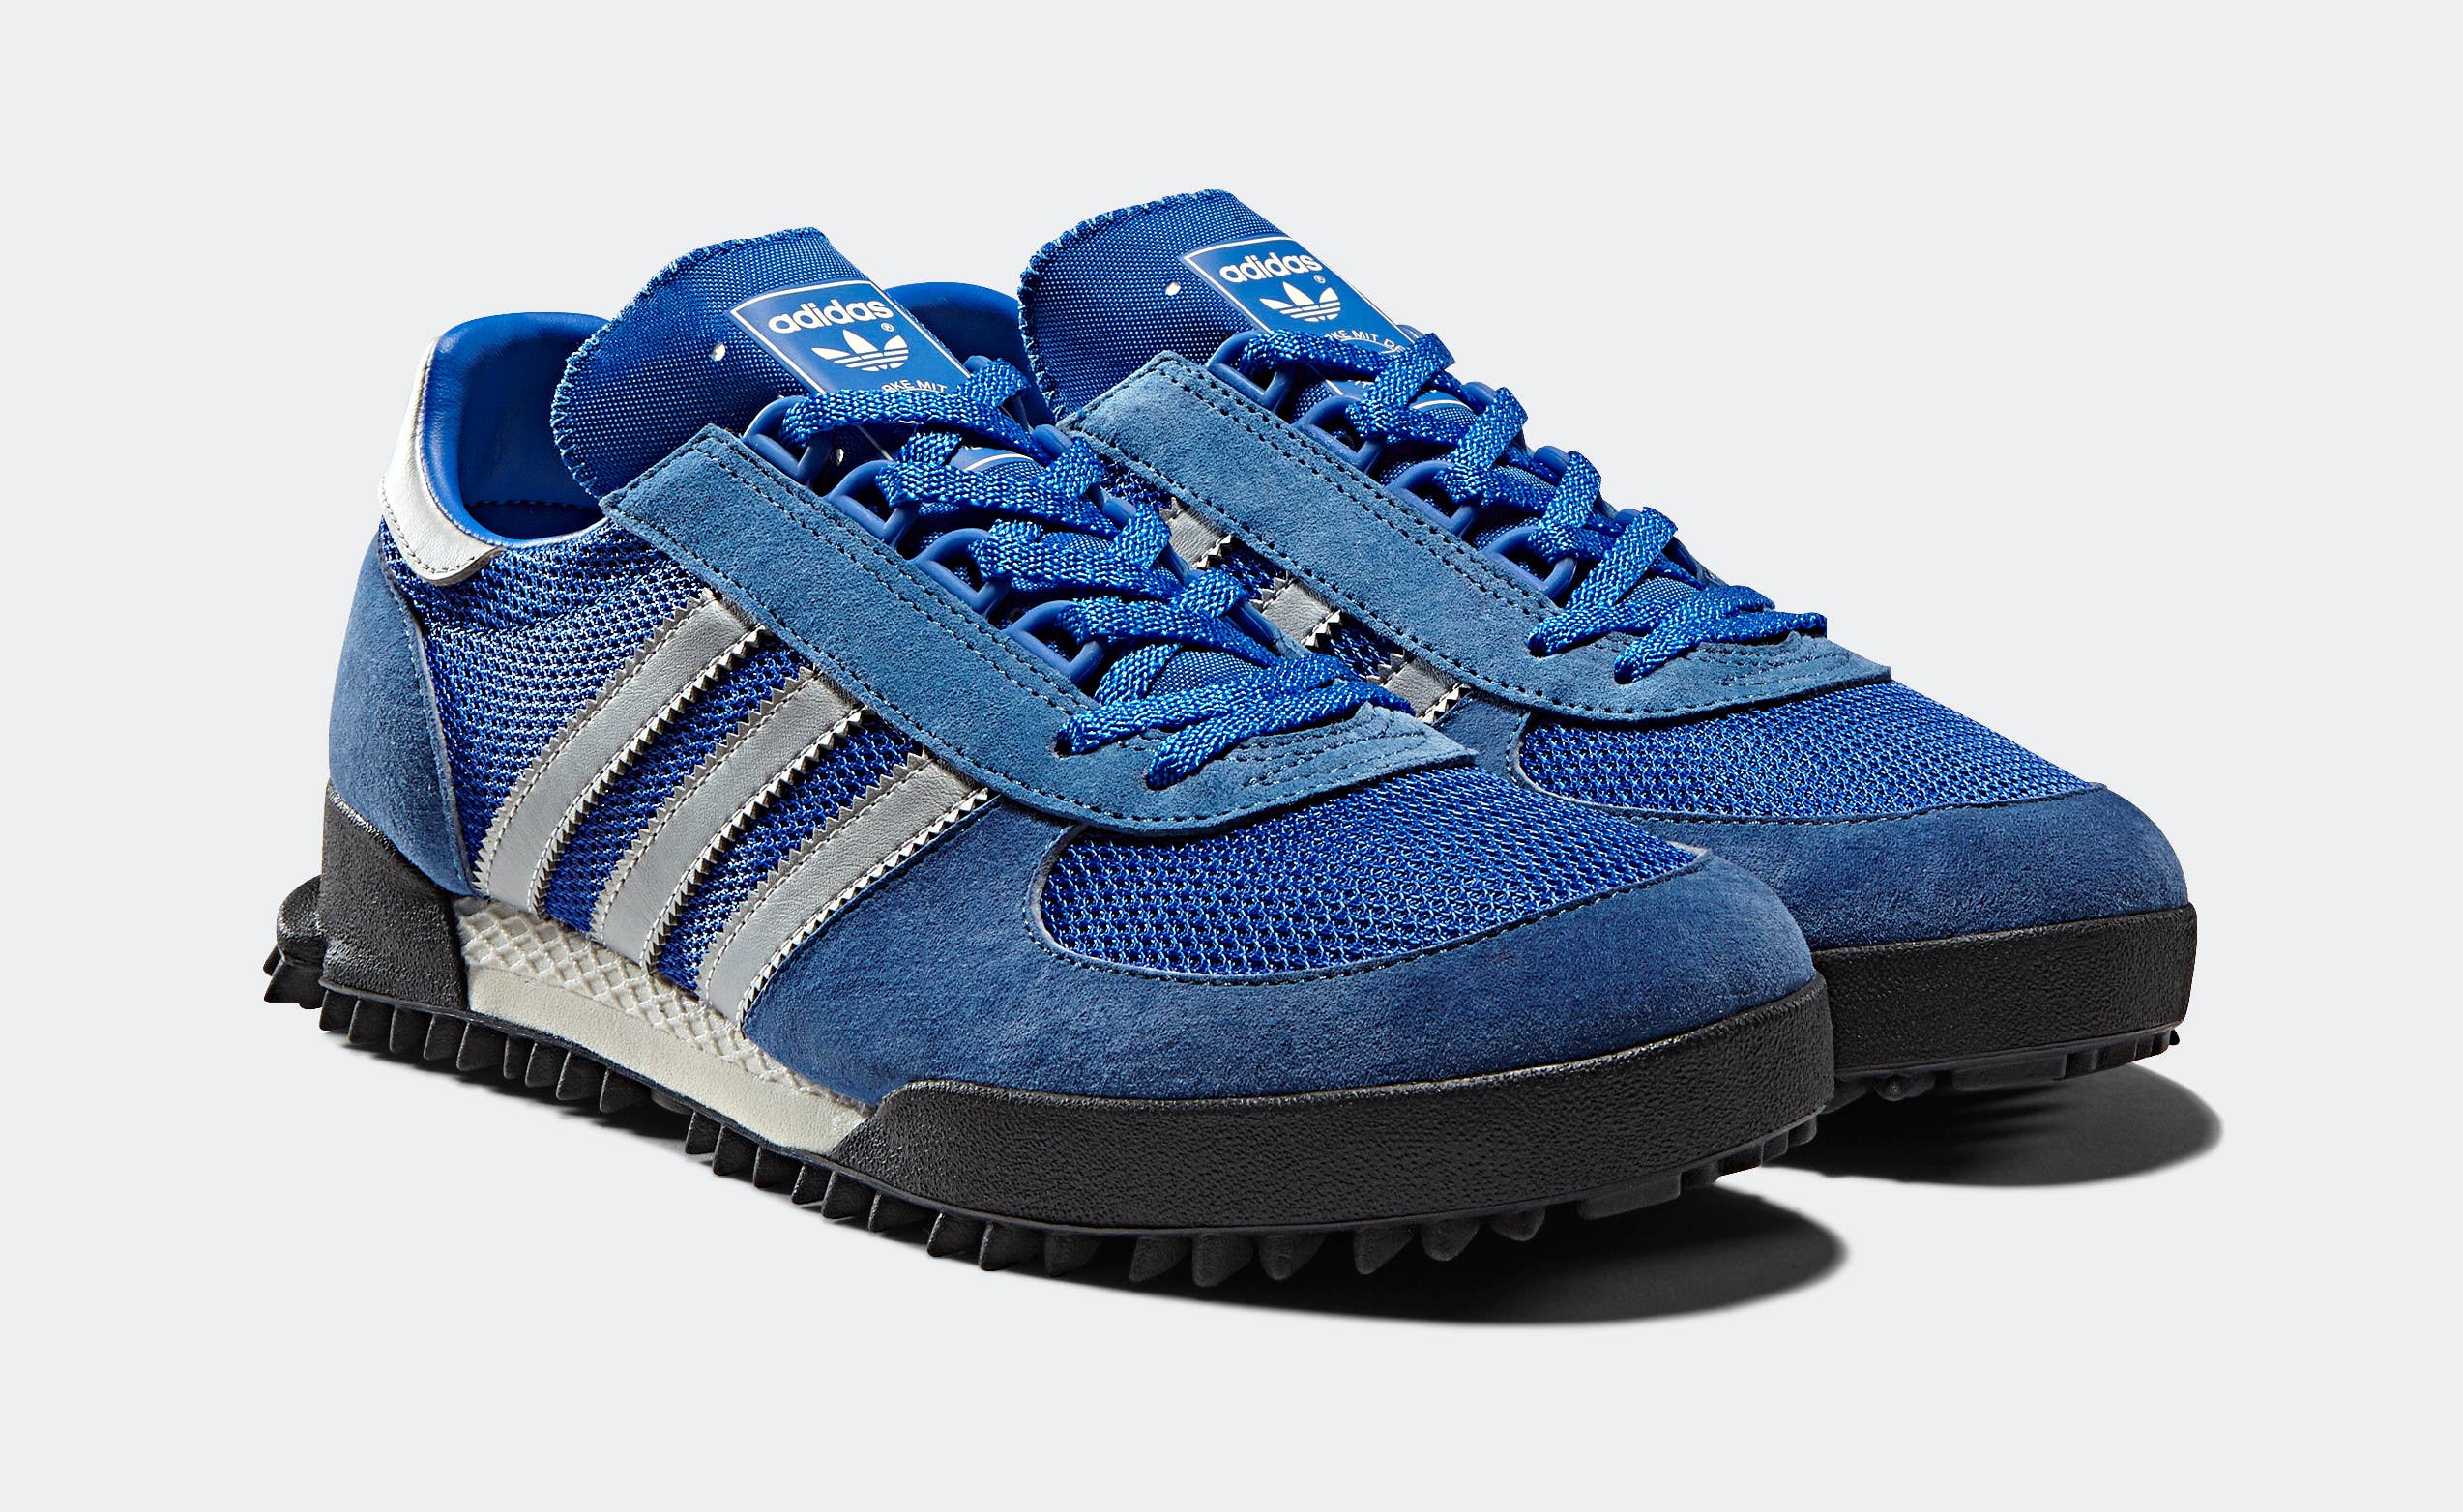 Adidas is Bringing Back a Complex New Classic Kick Year to Off the 